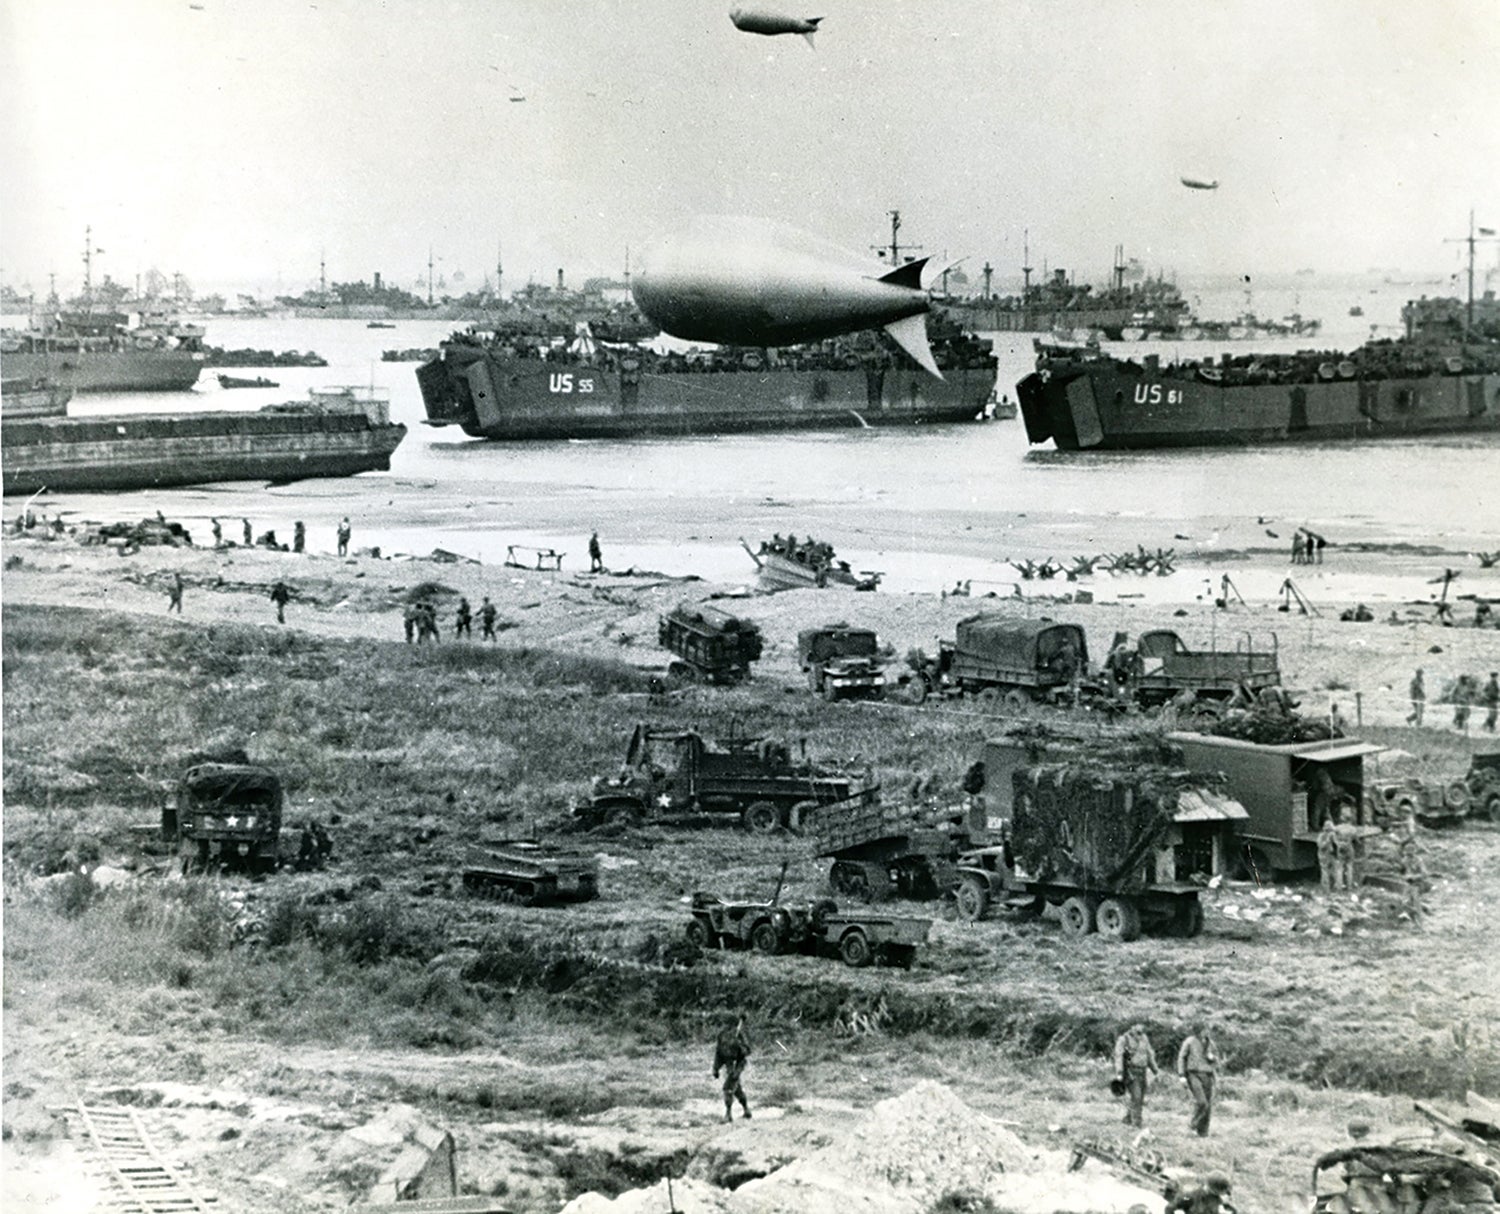 Clockwise from top: Supplies are brought ashore on the Normandy, France, beachhead on D-Day, June 6, 1944. (Credit: National Archives)